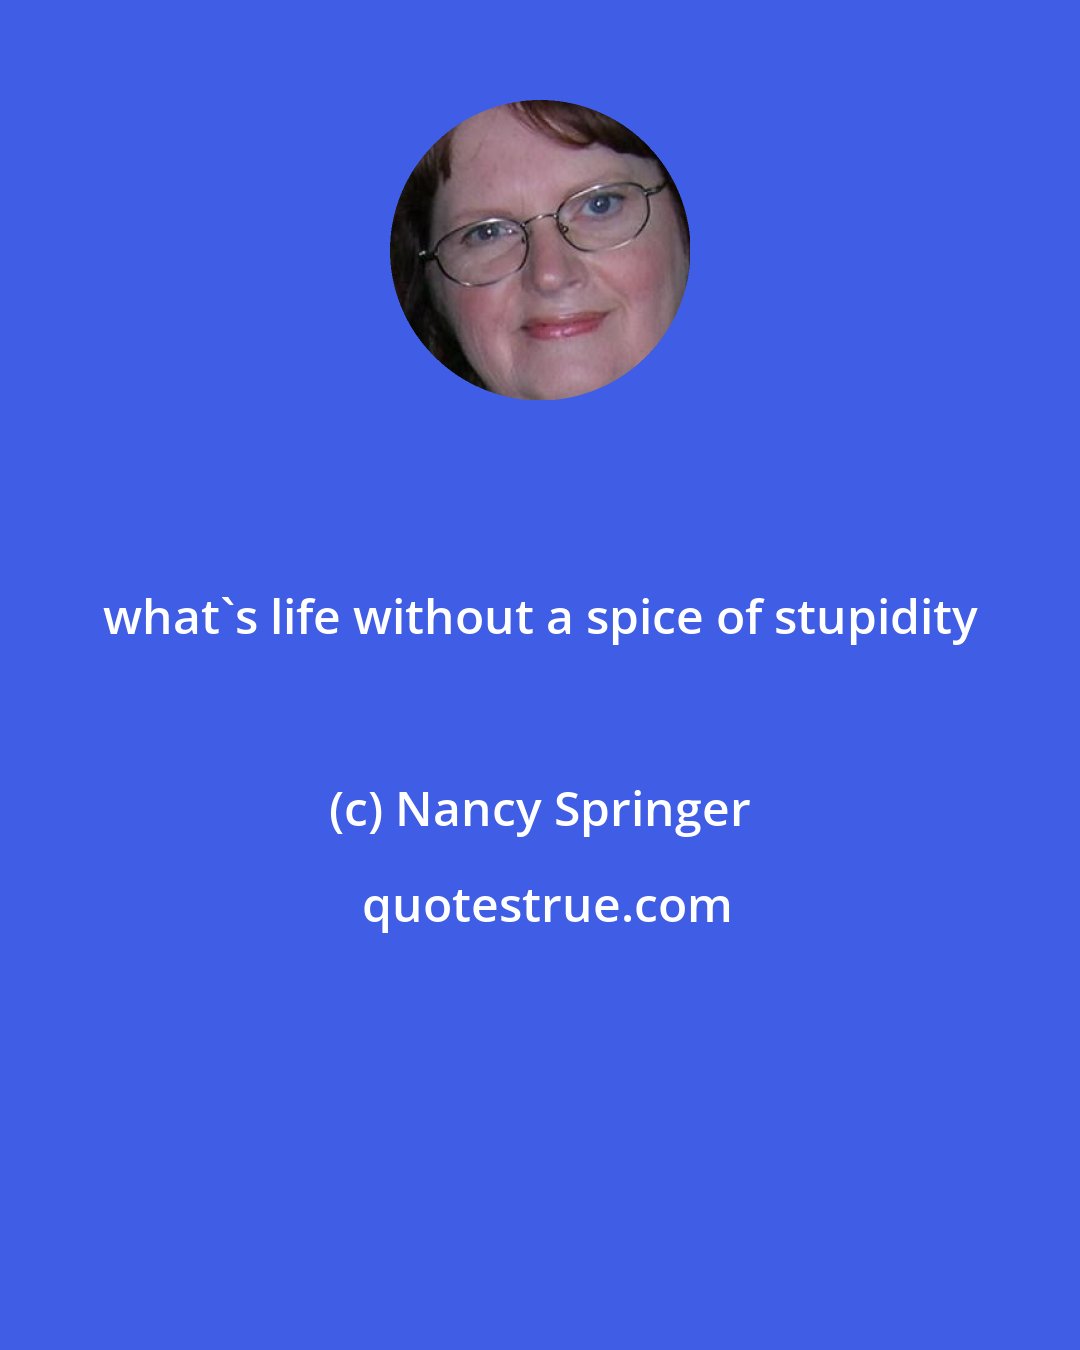 Nancy Springer: what's life without a spice of stupidity